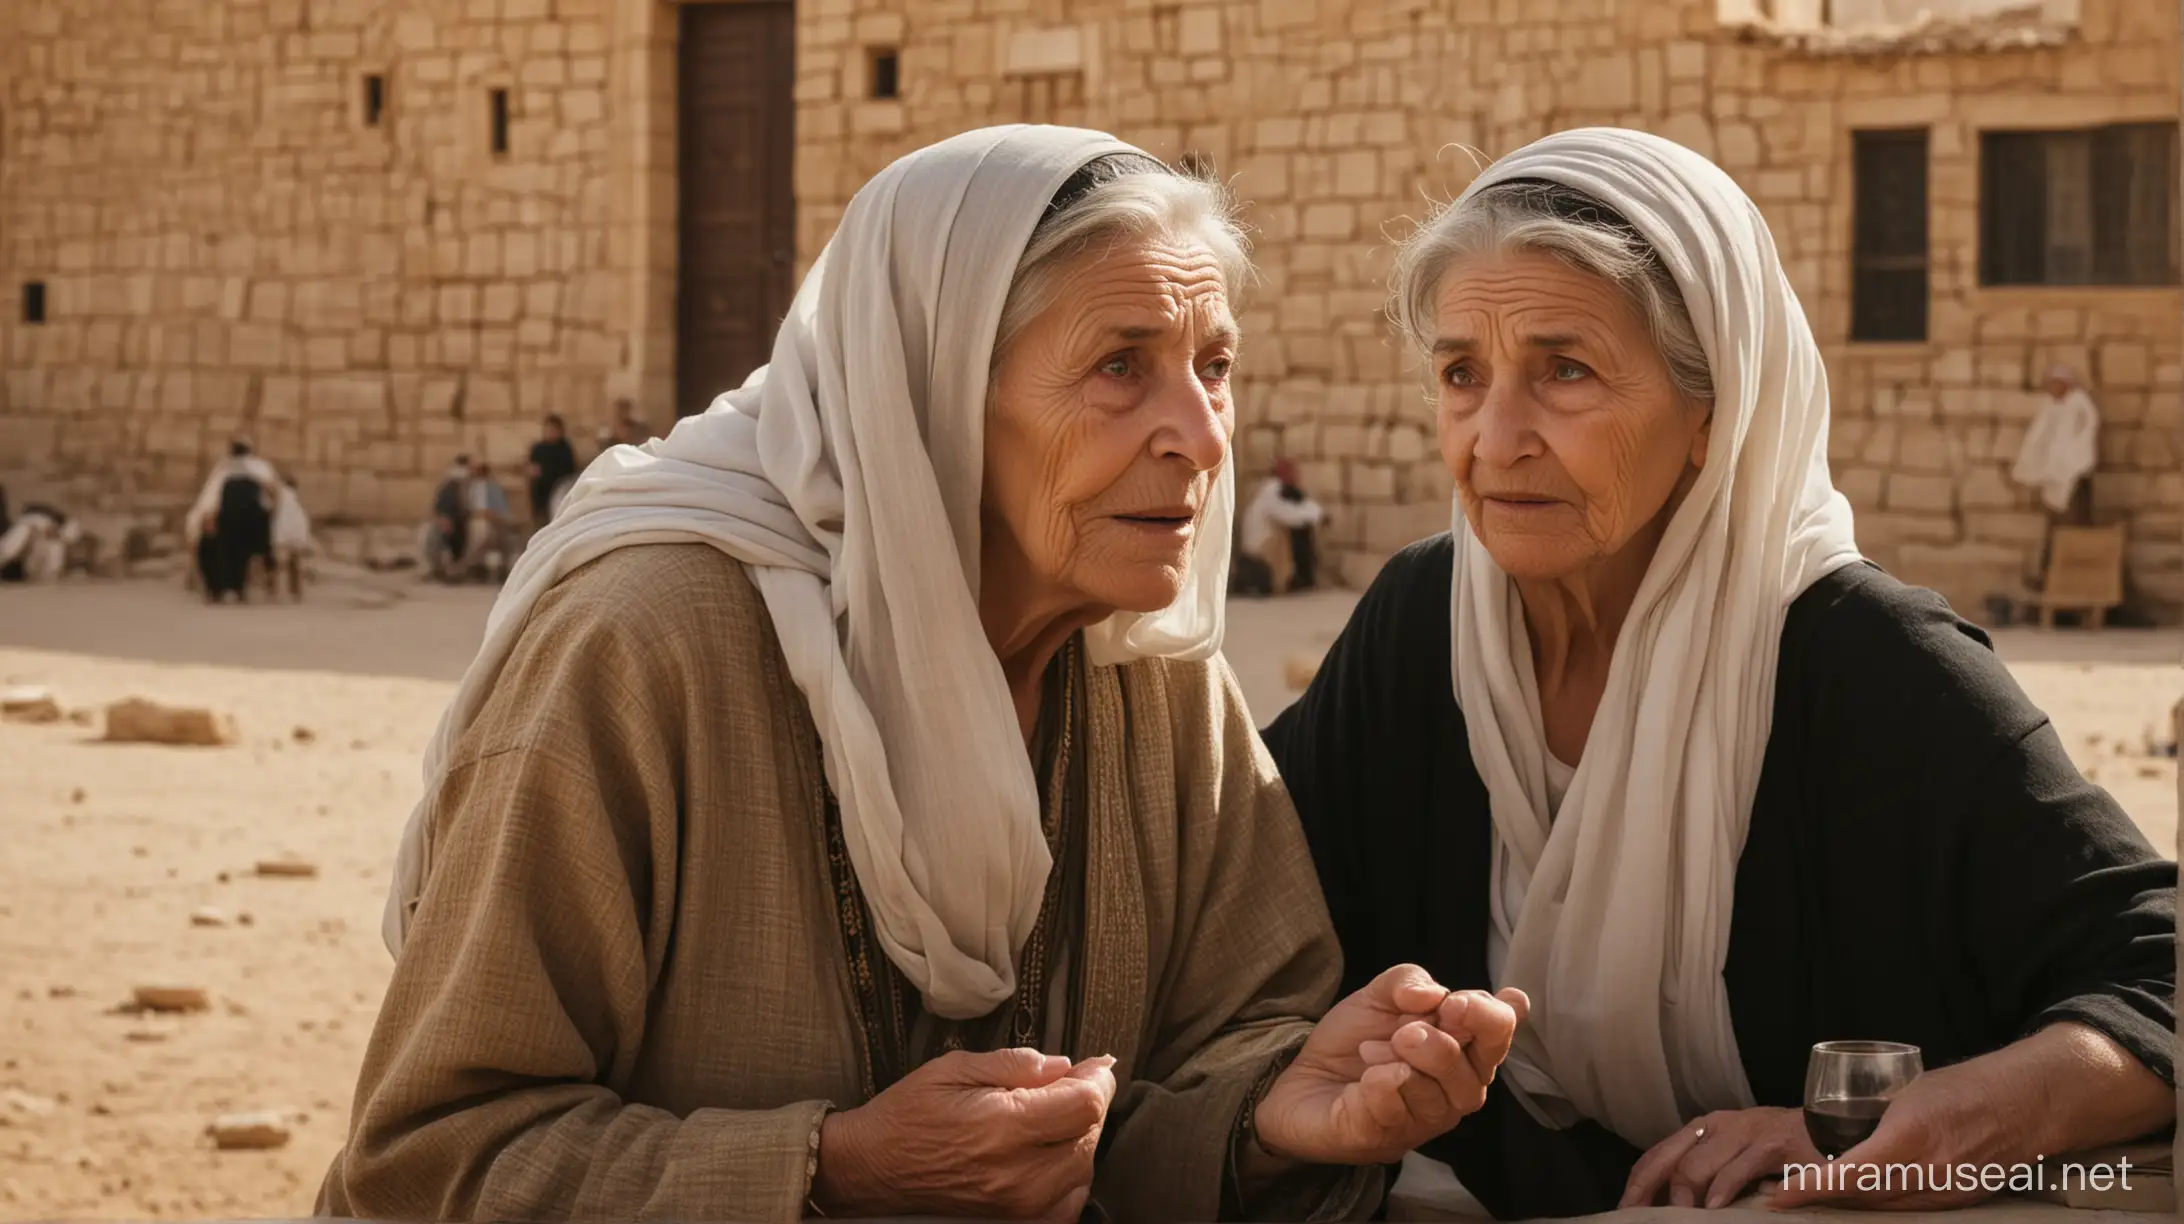 Biblical Era Encounter Old Woman and Young Man in the Middle East